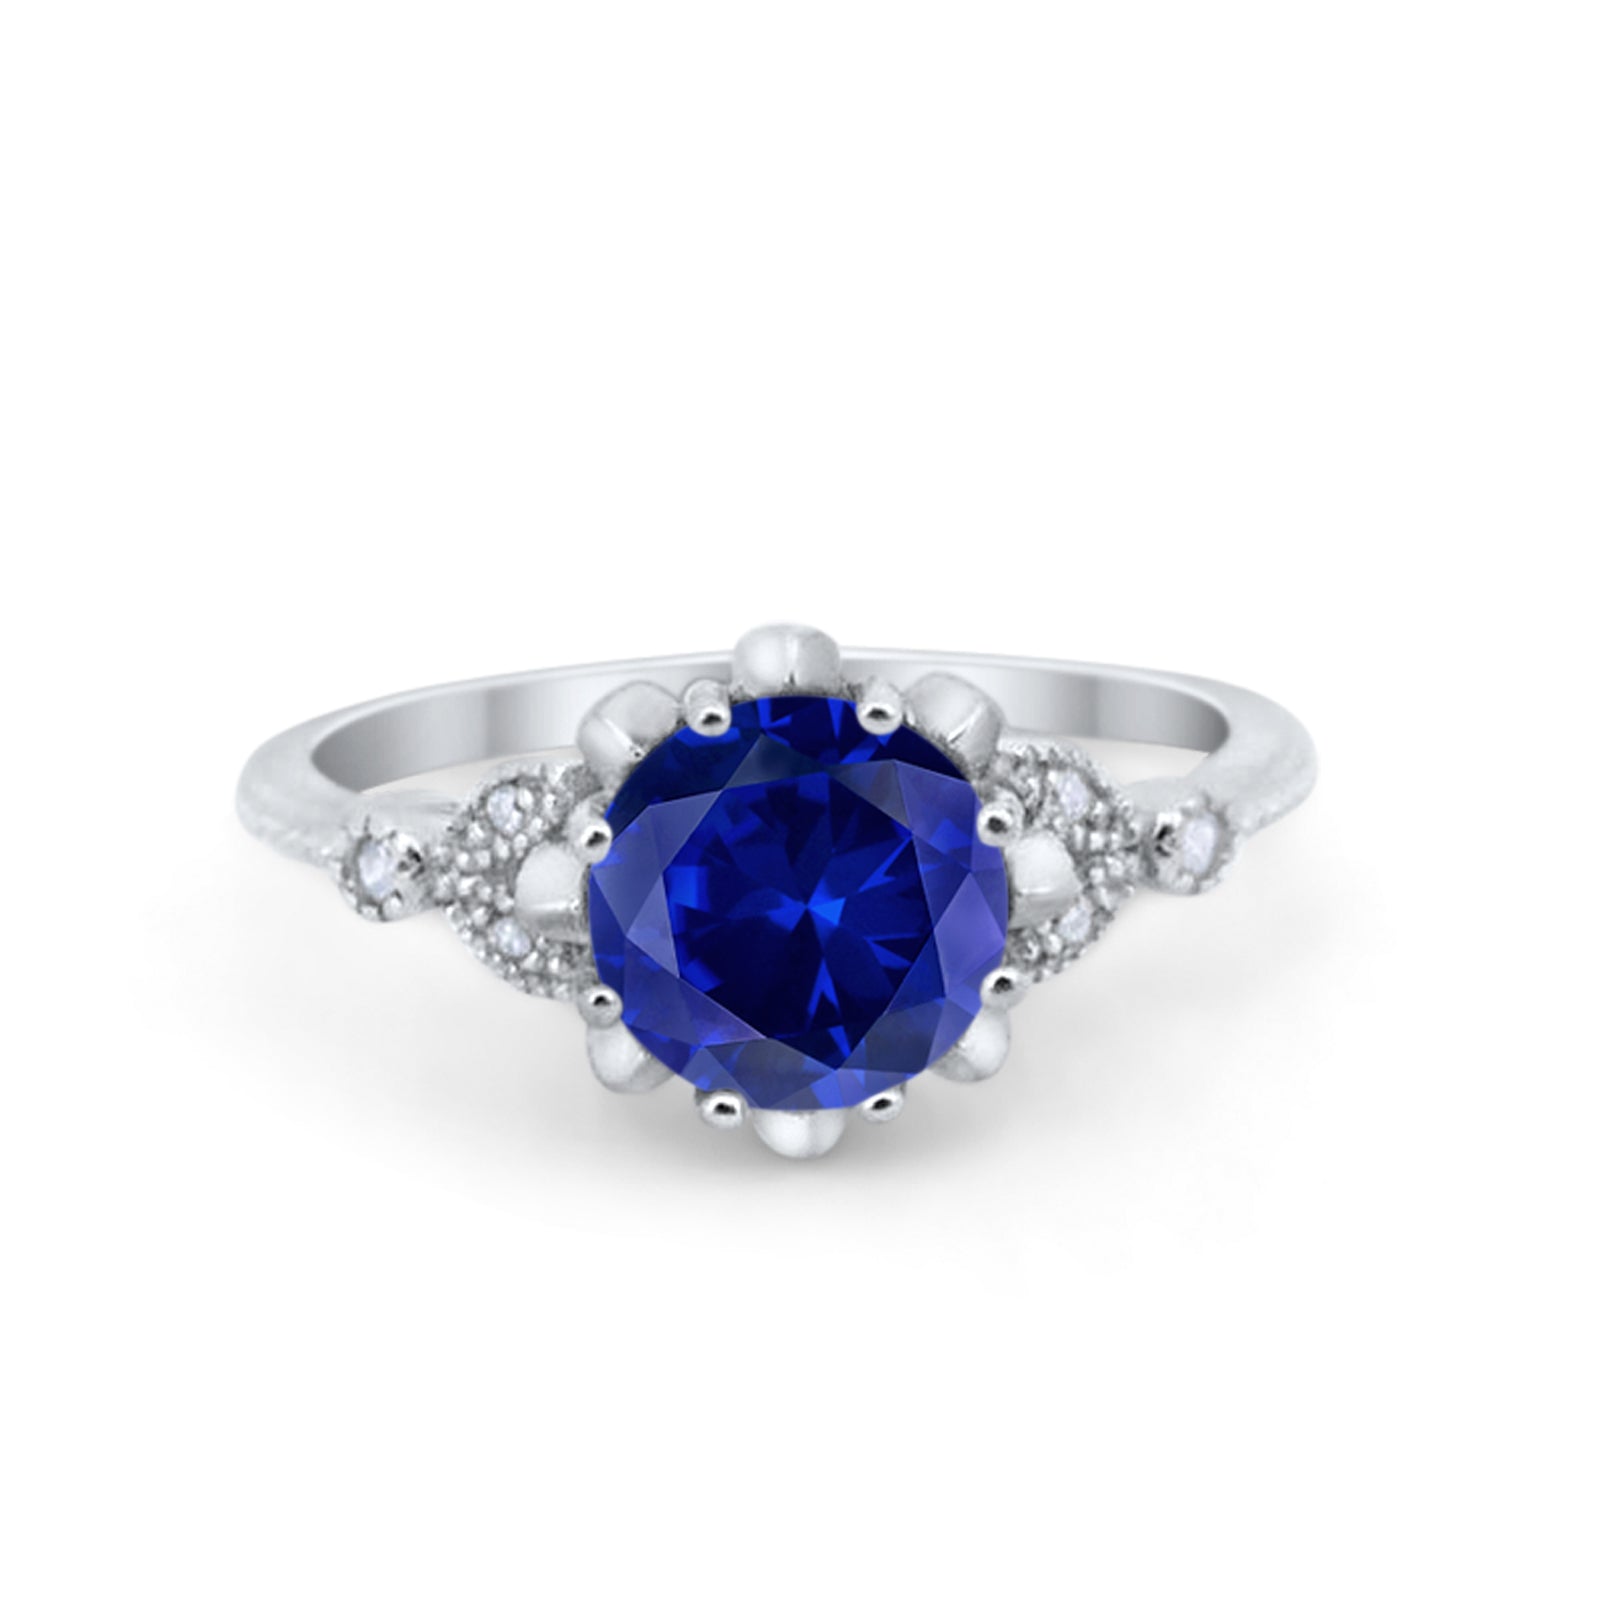 Art Deco Design Fashion Ring Round Simulated Blue Sapphire CZ 925 Sterling Silver